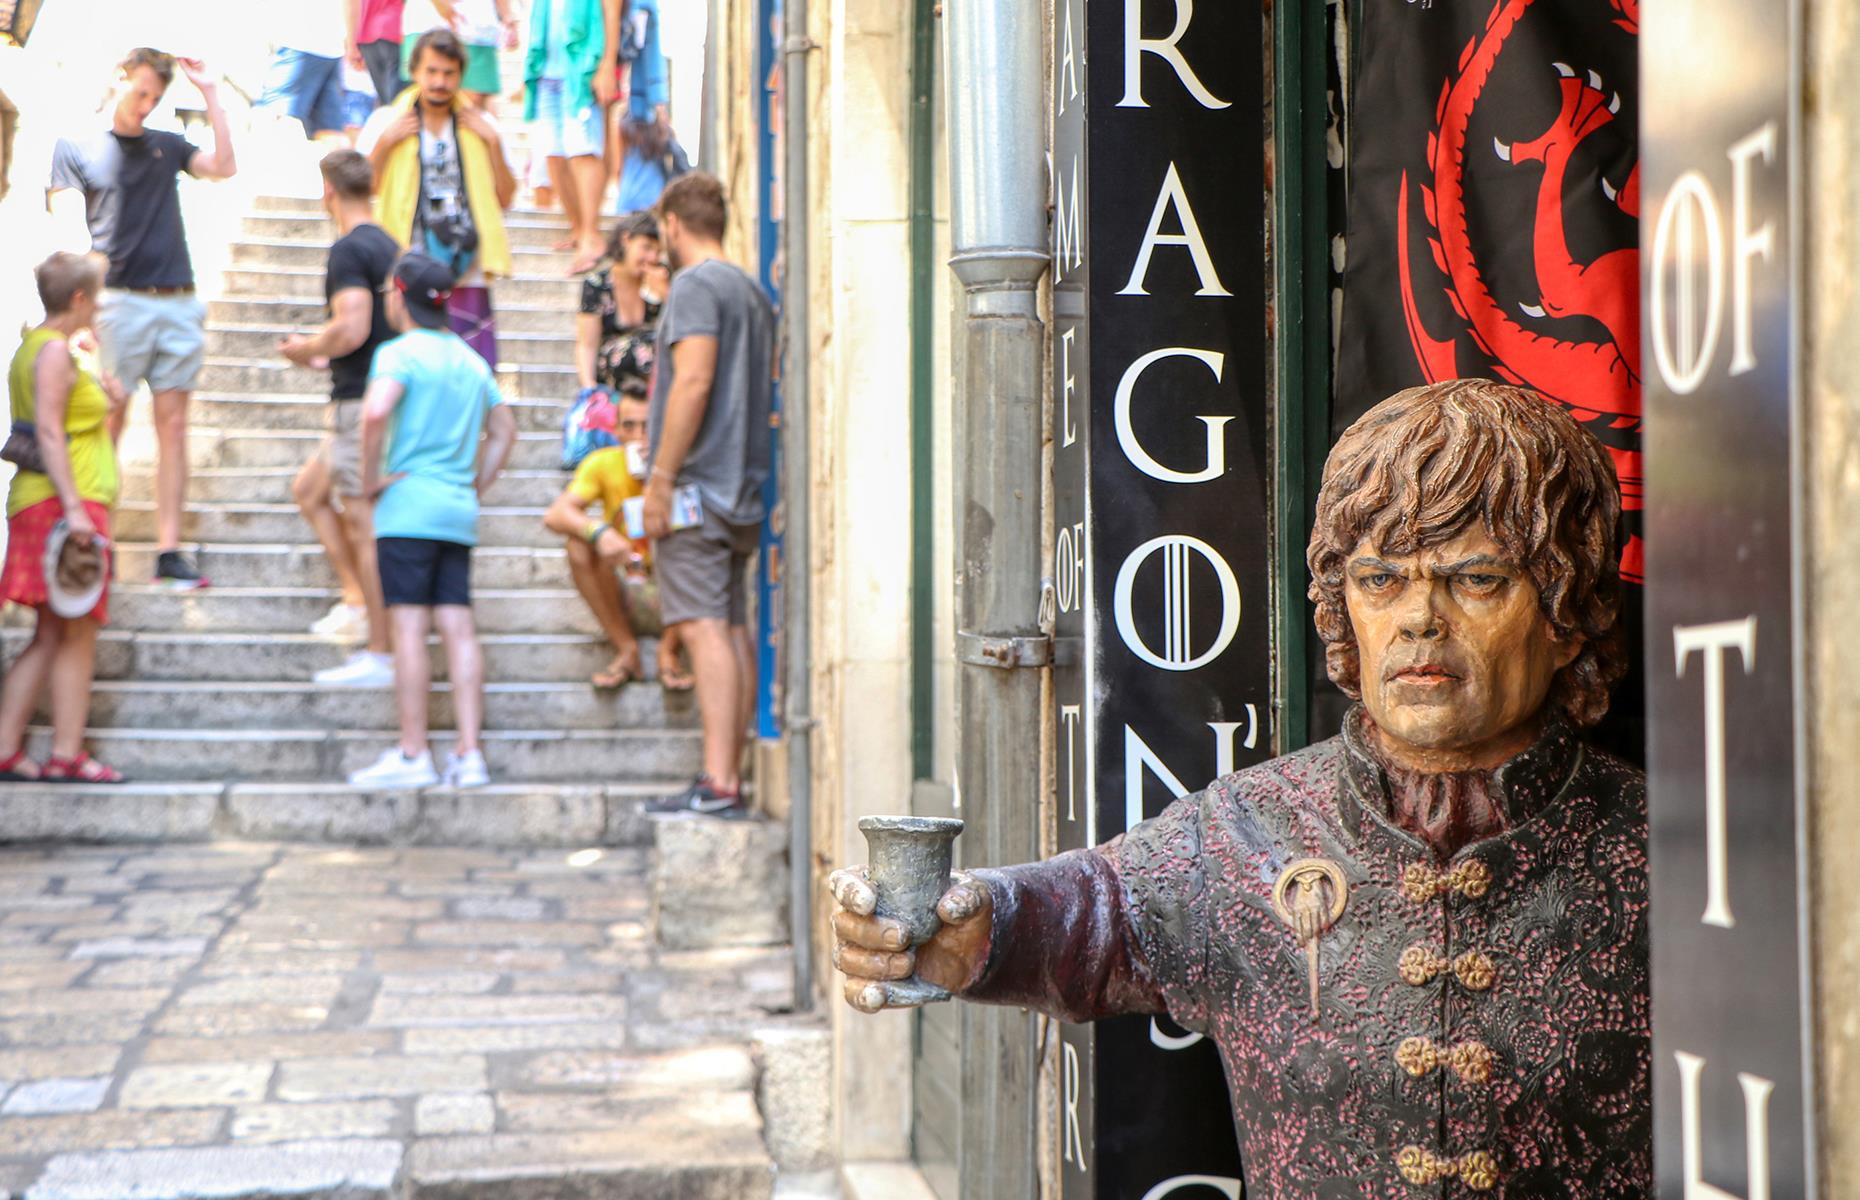 <p>With its majestic palaces, Baroque churches and pedestrianised cobbled streets, Dubrovnik’s UNESCO-listed walled old town will seem instantly familiar to anyone who’s seen <em>Game of Thrones</em>, because it doubled for the sunny King's Landing<em>.</em> A <em><a href="https://www.kingslandingdubrovnik.com/game-of-thrones-tours">Game of Thrones </a></em><a href="https://www.kingslandingdubrovnik.com/game-of-thrones-tours">Walking Tour</a> (with optional boat trip add-on) is a guaranteed hit, transporting your TV-obsessed teens to the locations used in the series, from formidable fortresses to the city walls. Avoid the crowds by visiting in late autumn or early spring. </p>  <p><a href="https://www.loveexploring.com/galleries/164656/this-incredible-country-has-the-most-unesco-world-heritage-sites"><strong>This incredible country has the most UNESCO World Heritage Sites</strong></a></p>